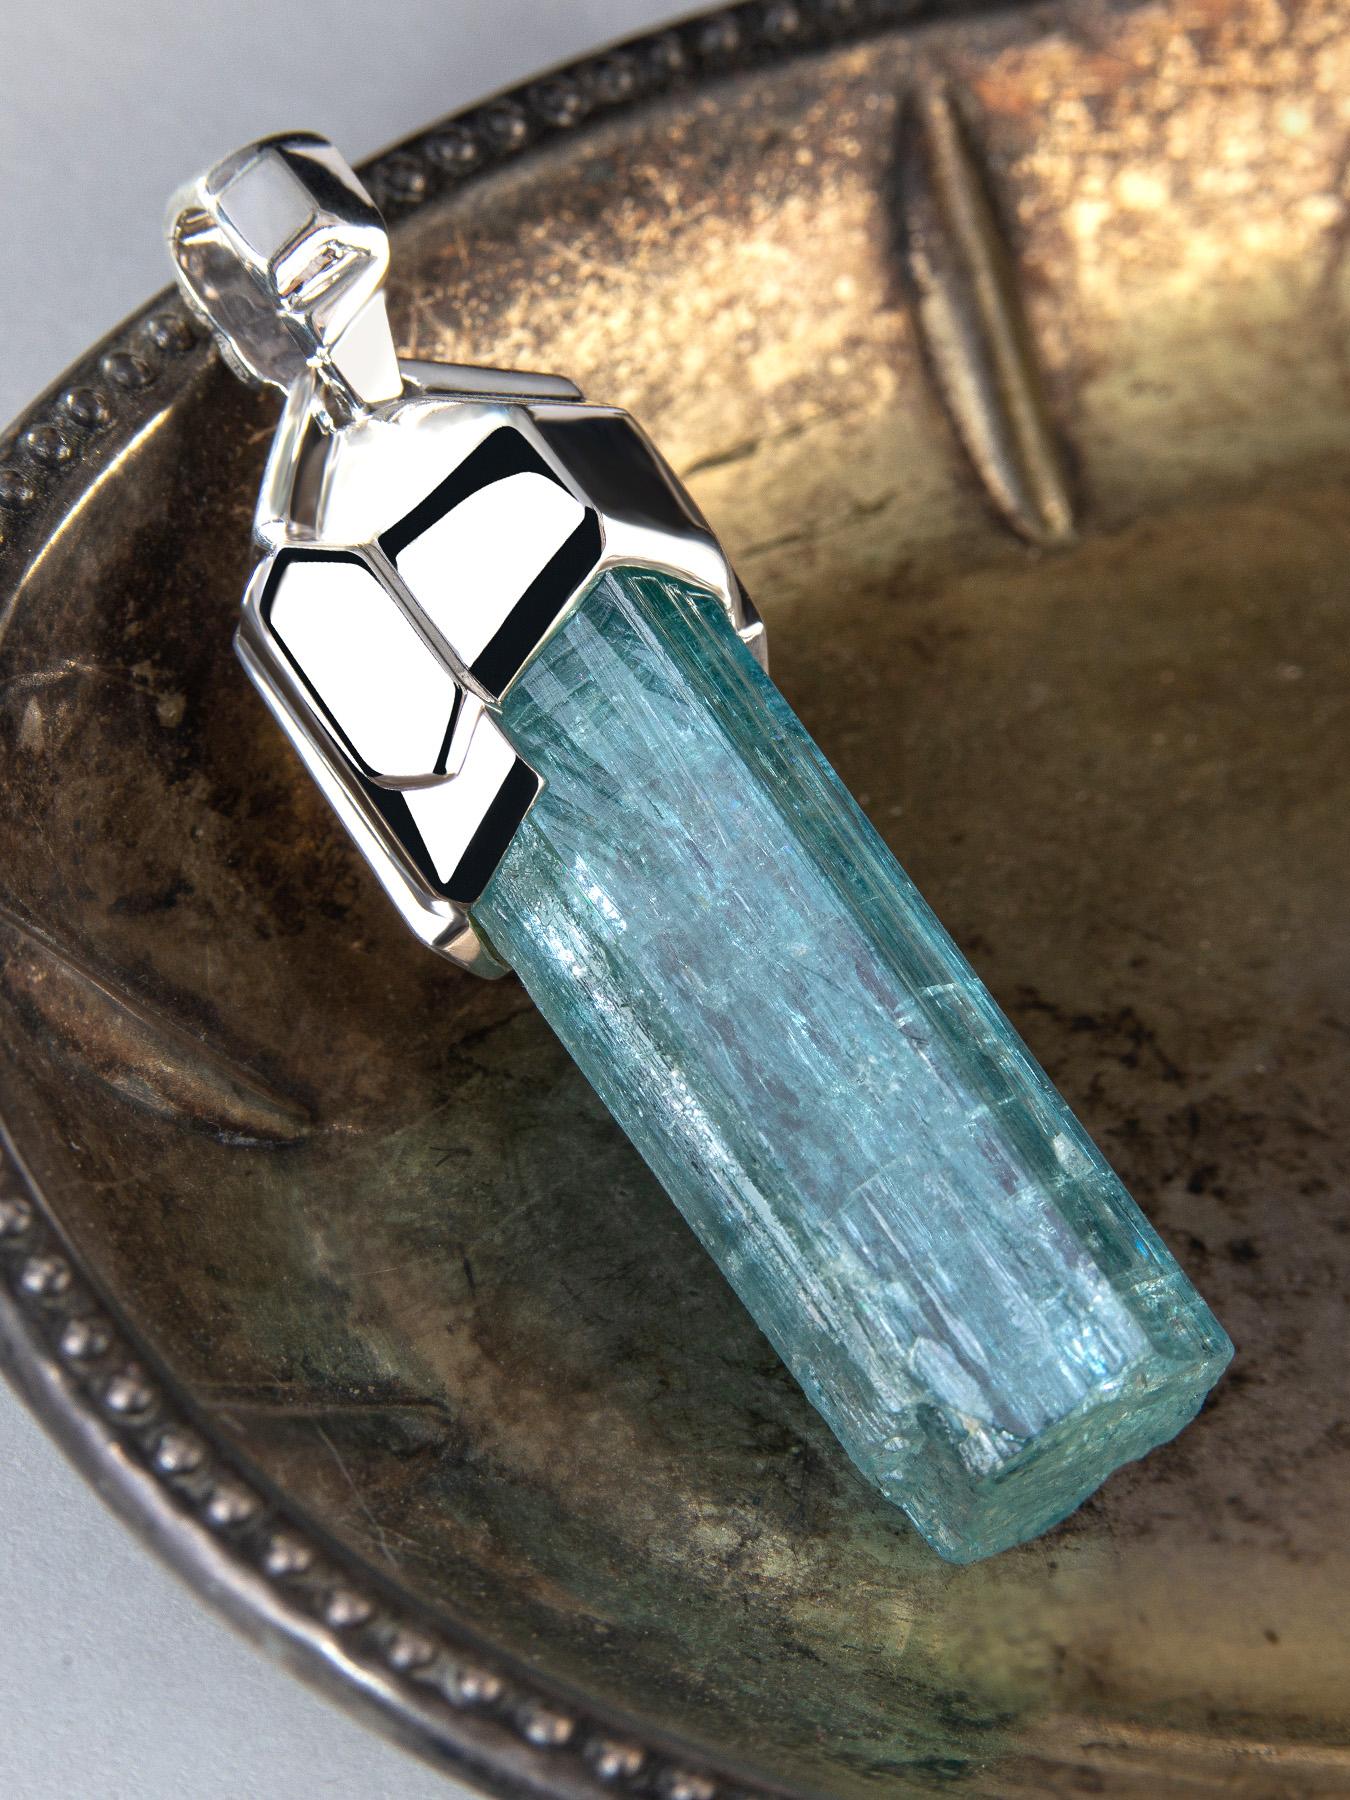 Large silver necklace with natural Aquamarine crystal
crystal measurements - 0.63 х 1.73 in / 16 х 44 mm
stone weight - 82 carats
pendant weight - 34.60 grams
pendant height  - 2.64 in / 67 mm

We ship our jewelry worldwide – for our customers it is